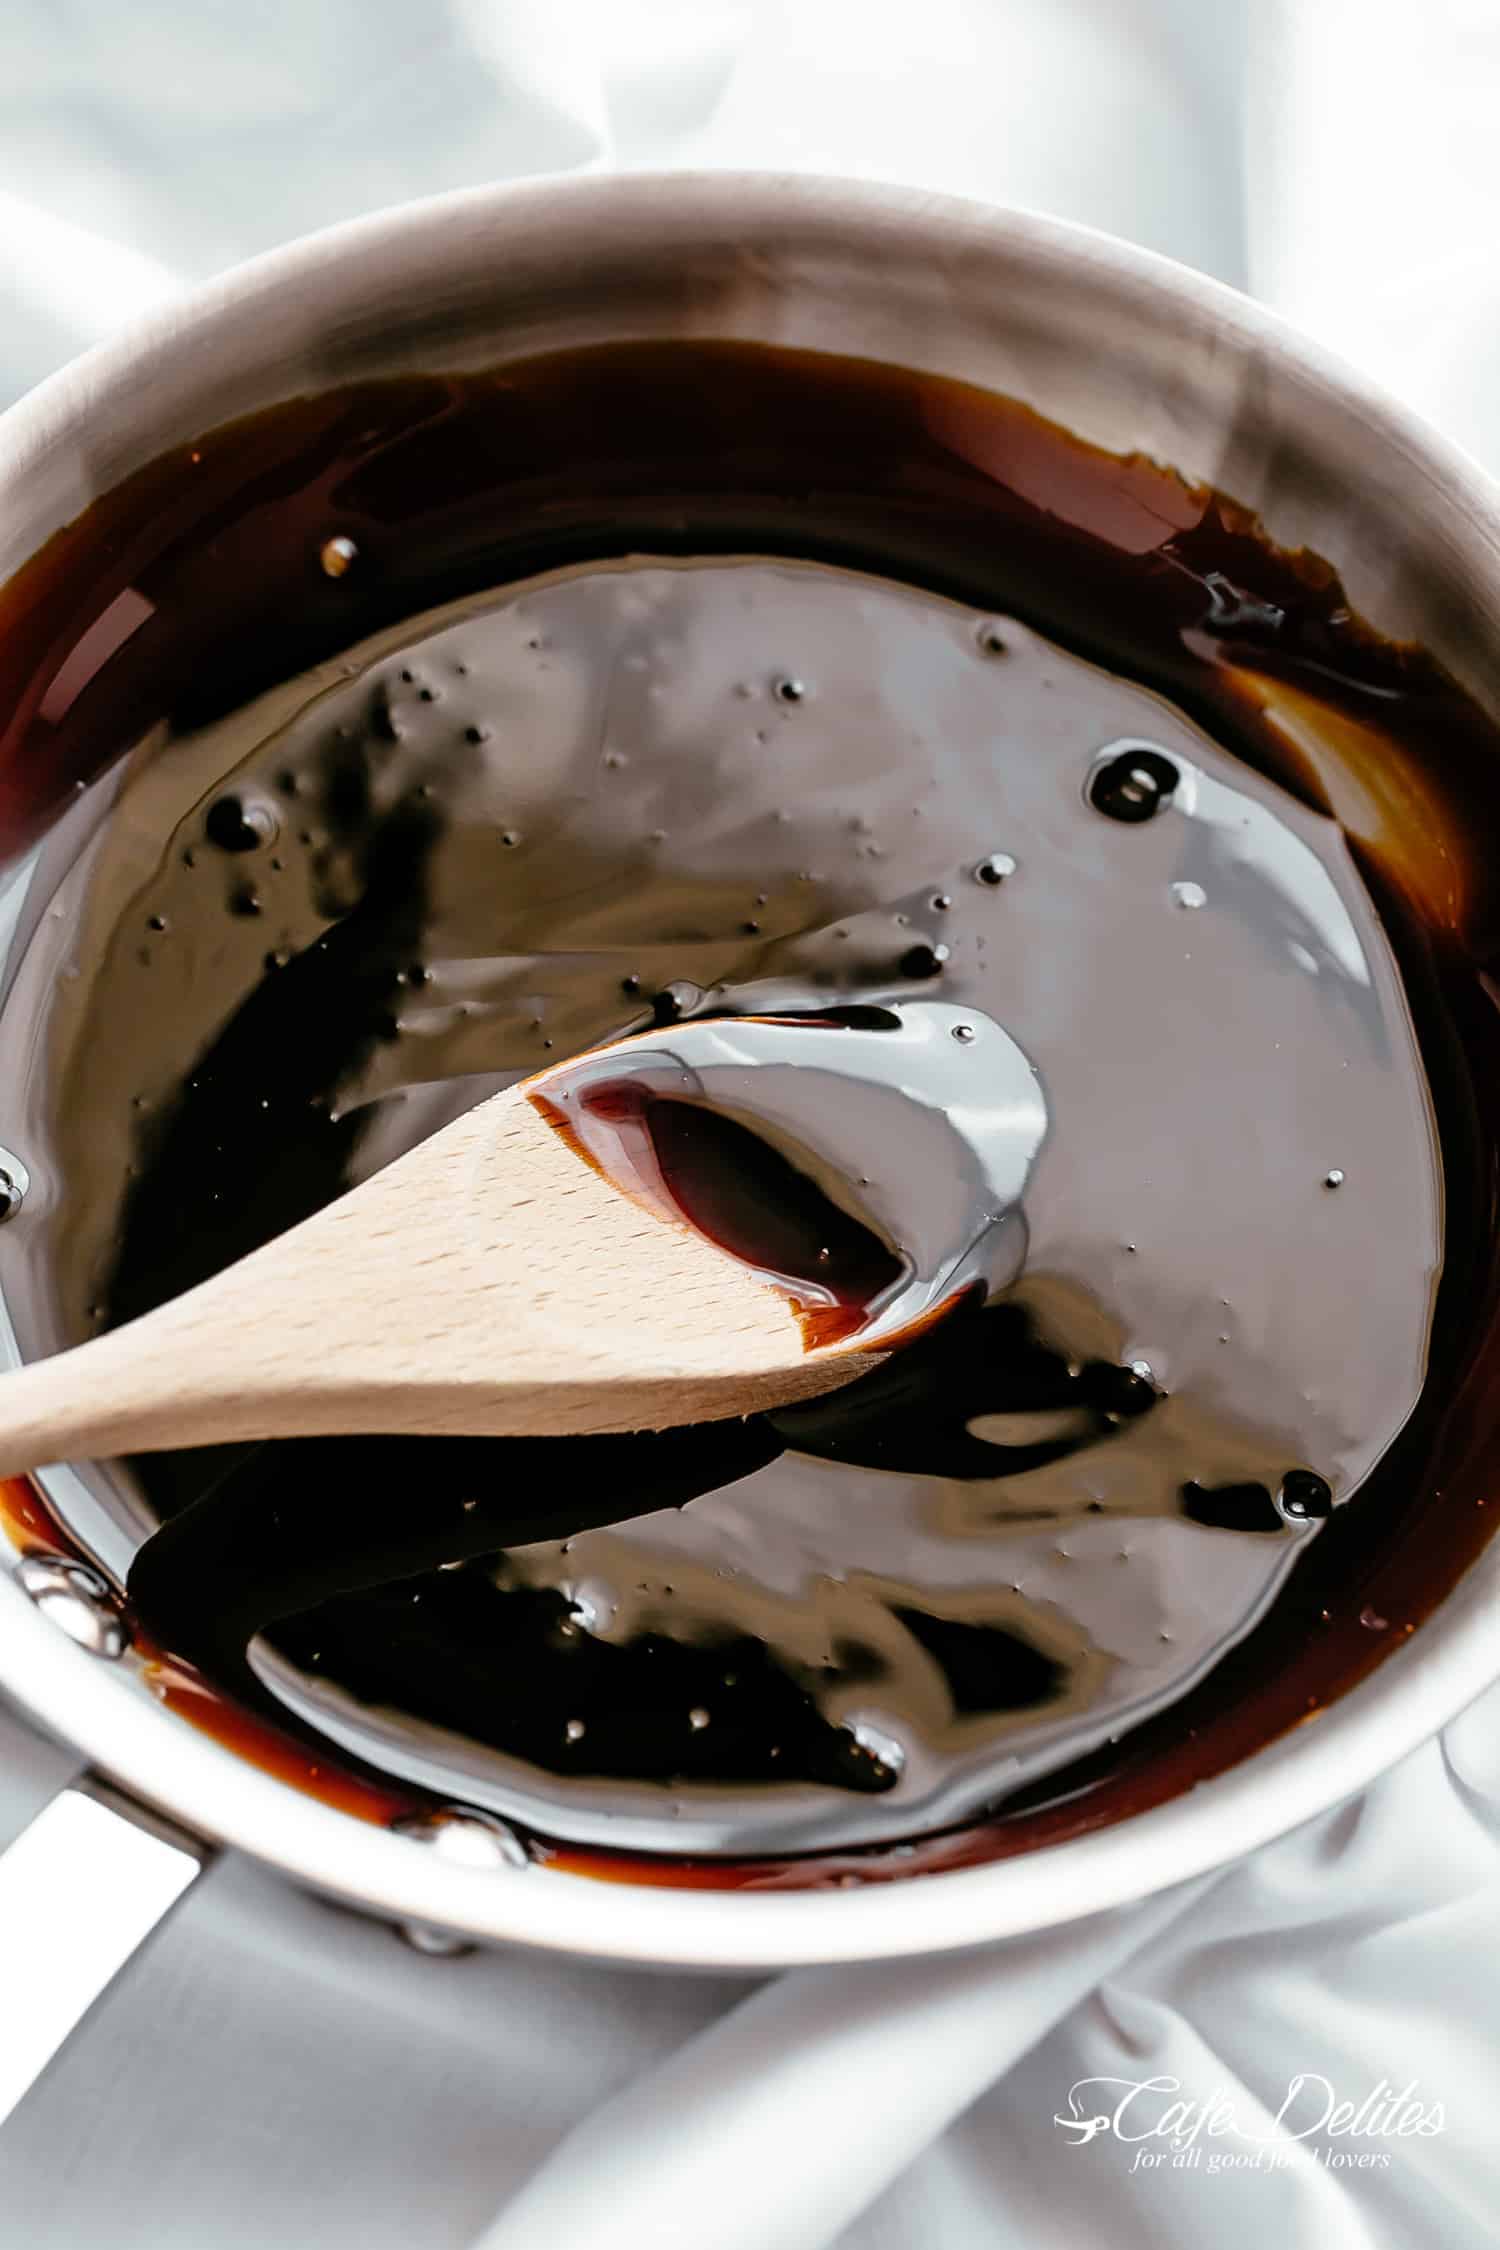 How to make Balsamic Glaze or Reduction in minutes with just one ingredient! Homemade Balsamic Glaze (also known as balsamic reduction) is so easy to make in your very own kitchen.